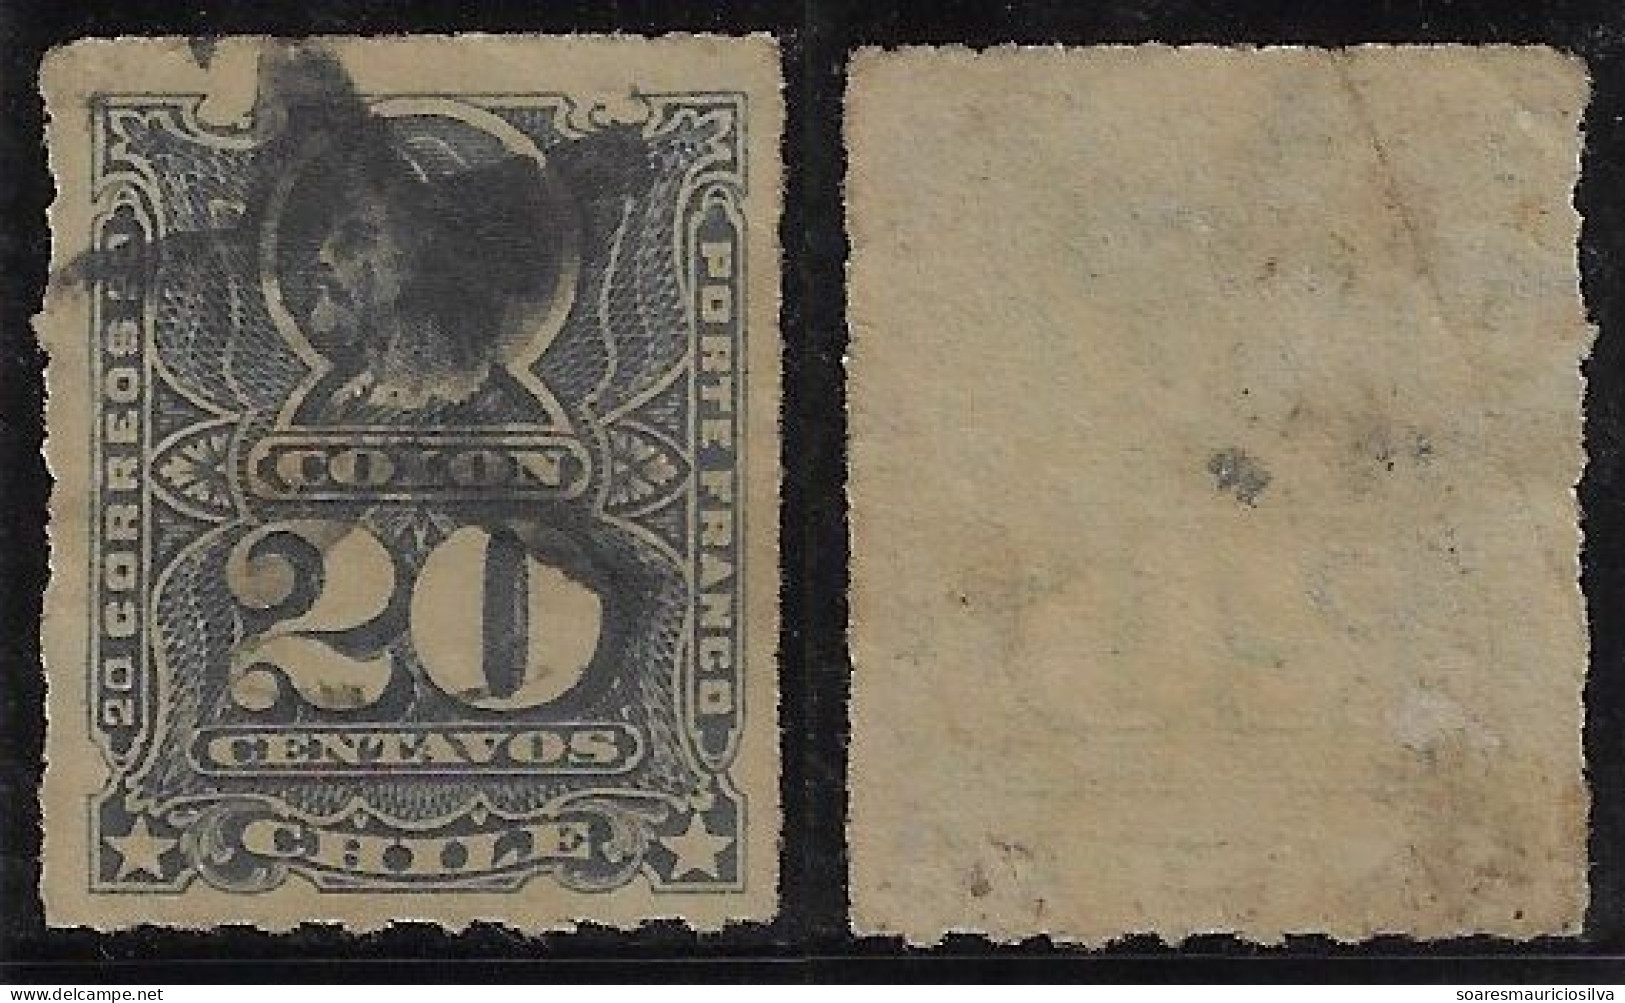 Chile 1886 Stamp Christopher Columbus 20 Cents Fancy Cancel Mute Postmark Star - Chili